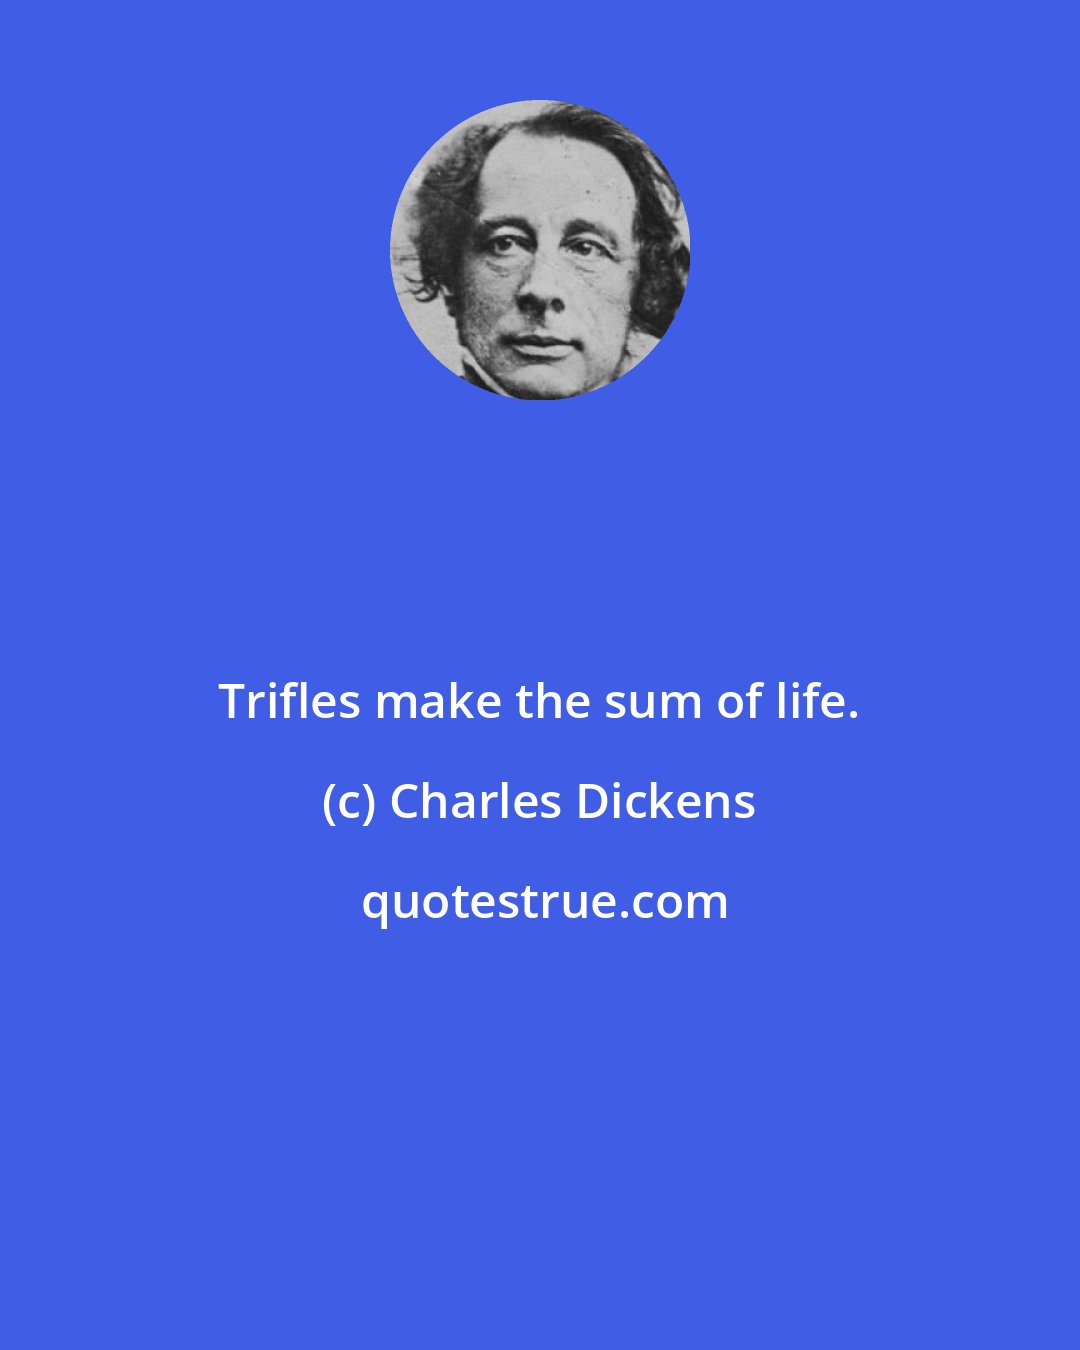 Charles Dickens: Trifles make the sum of life.